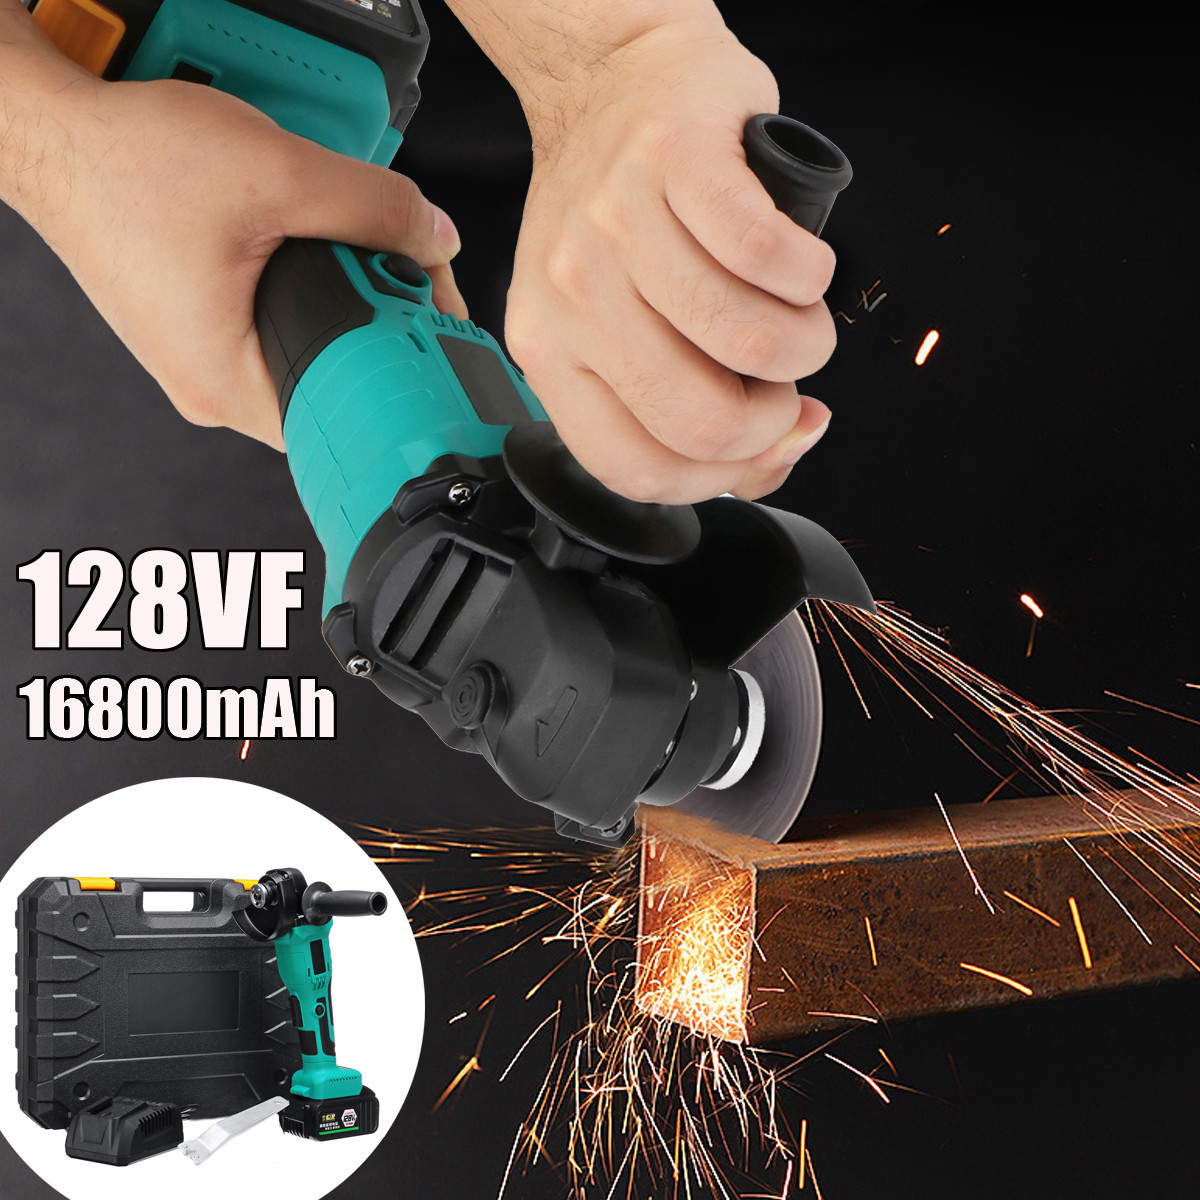 128VF-1300W-10000RPM-Cordless-Brushless-Angle-Grinder-with-16800mAh-Li-Ion-Battery-1520444-2